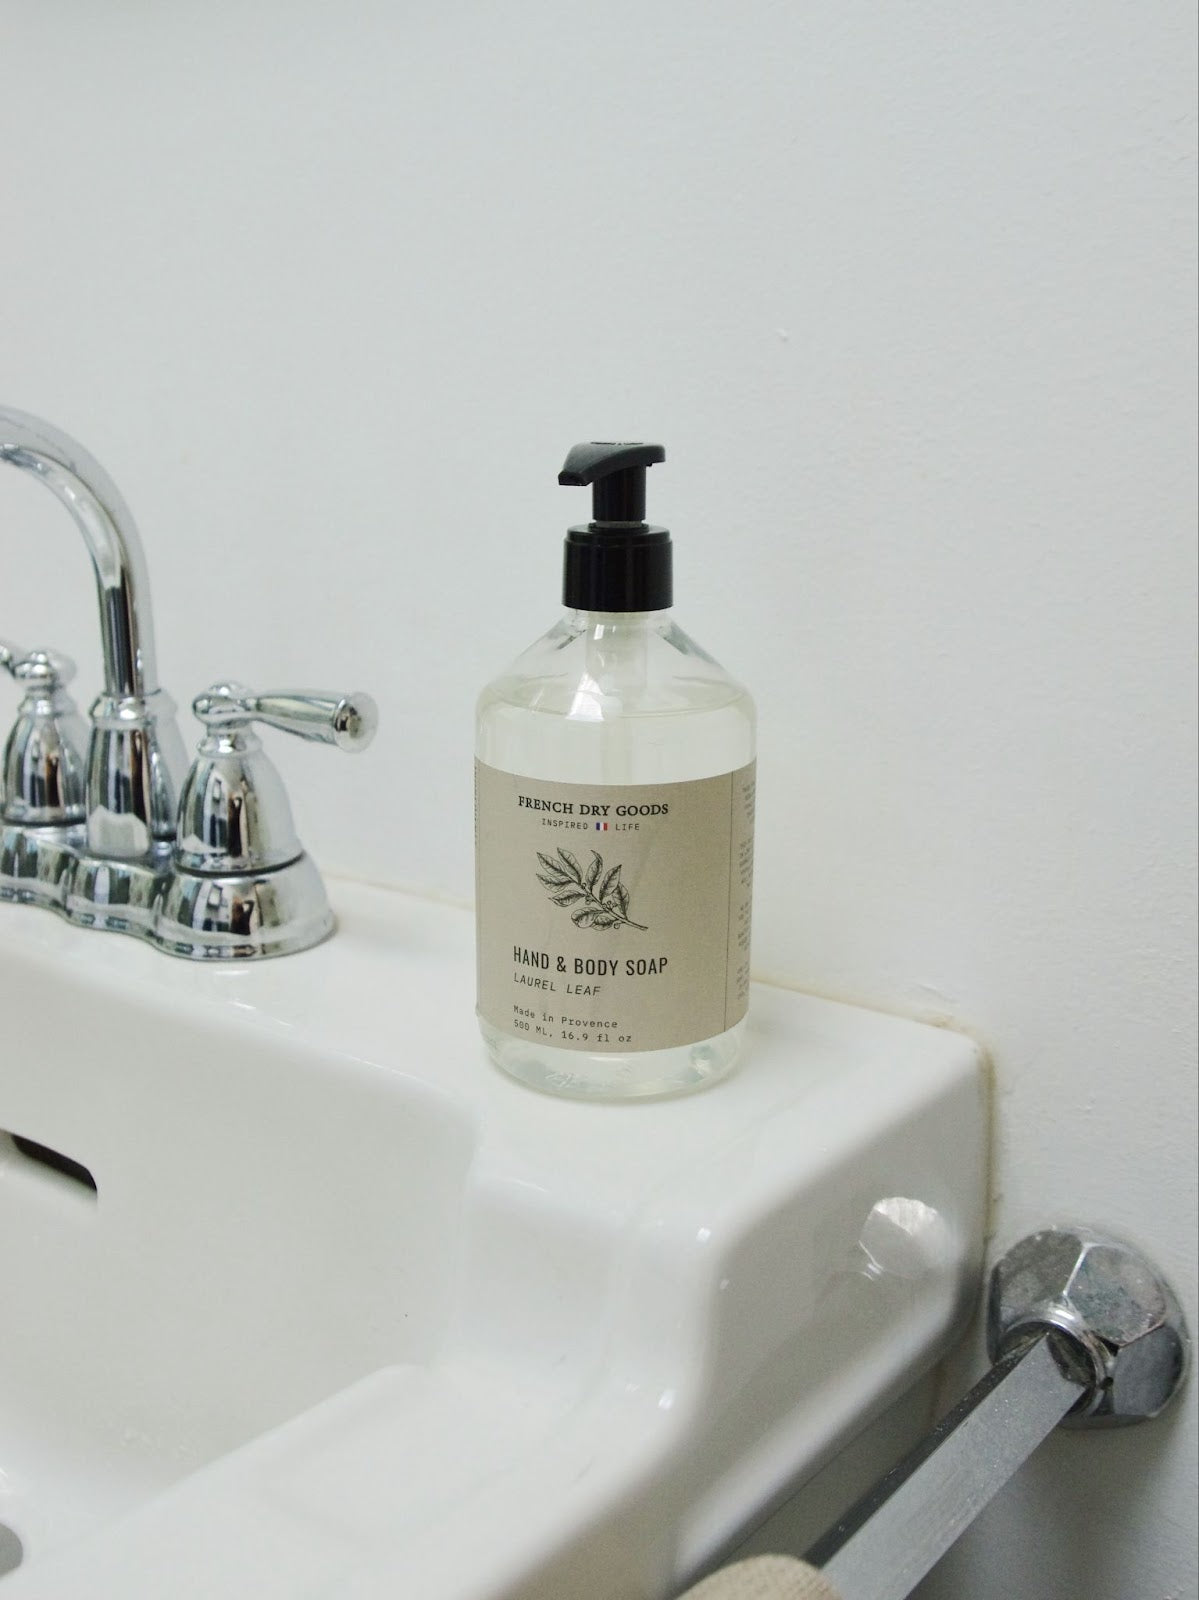 Laurel leaf scented liquid hand and body soap bottle with pump on bathroom sink.